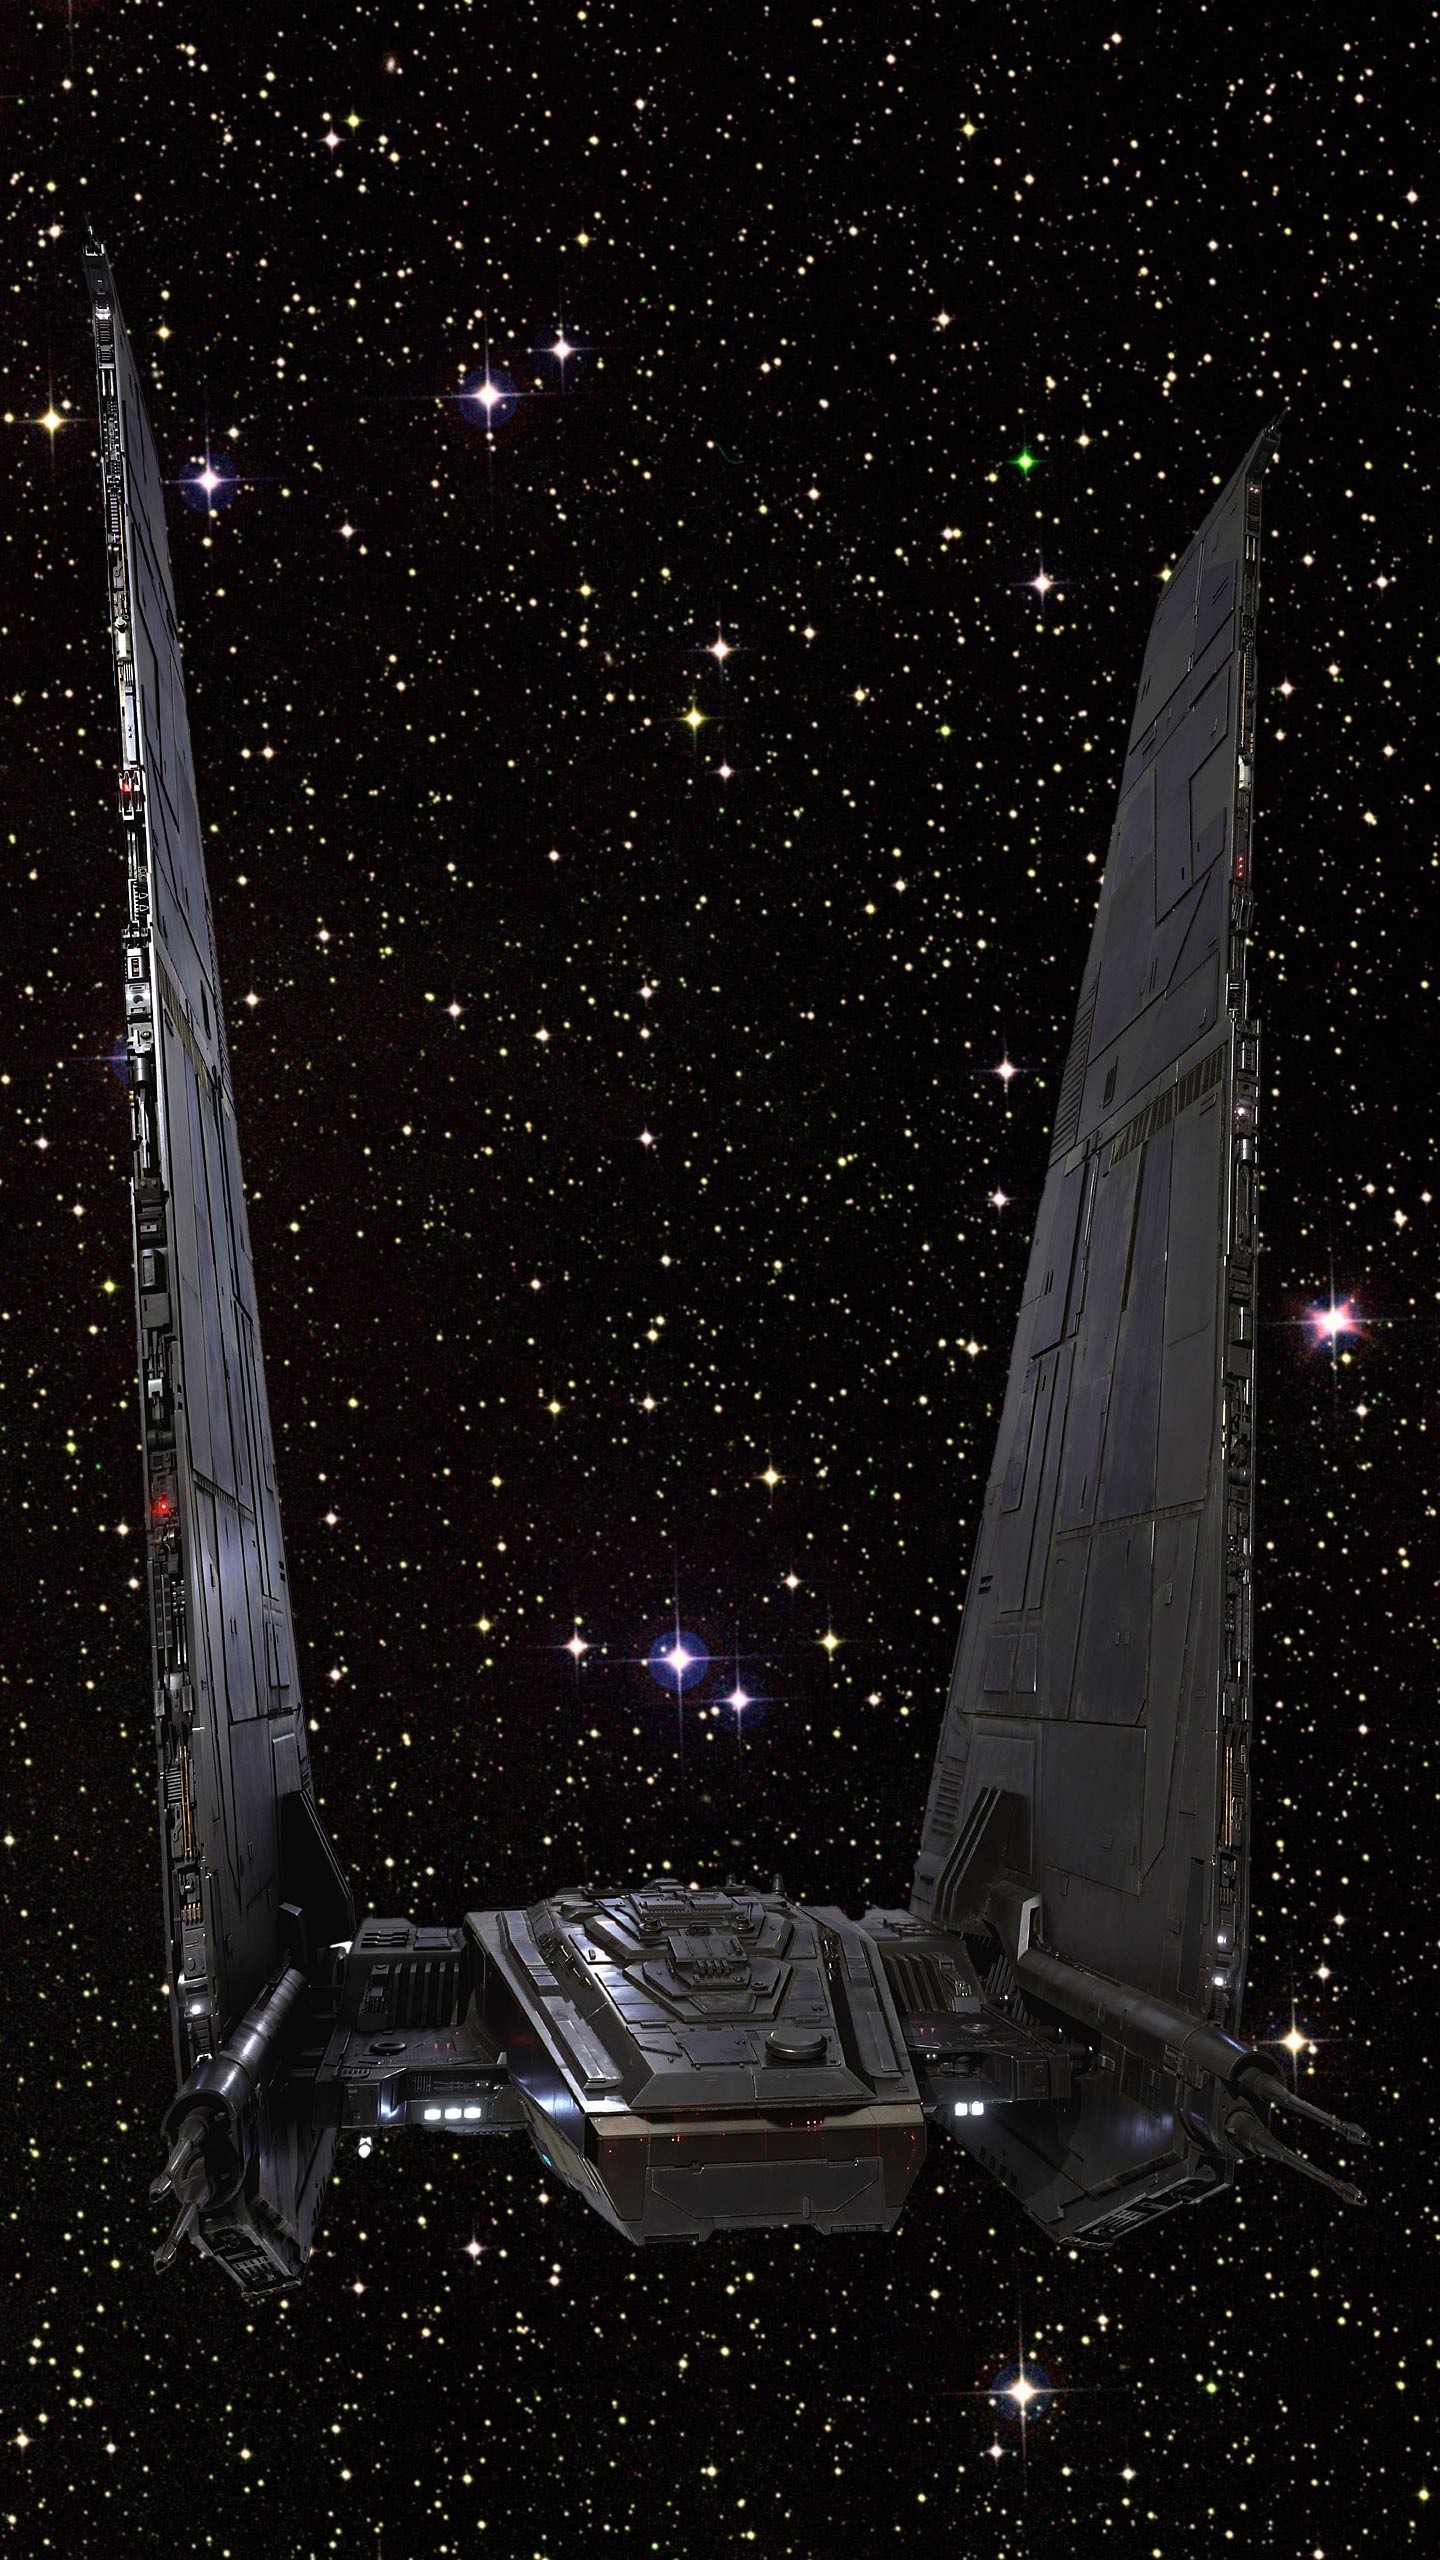 star wars live wallpaper,sky,night,space,architecture,monument